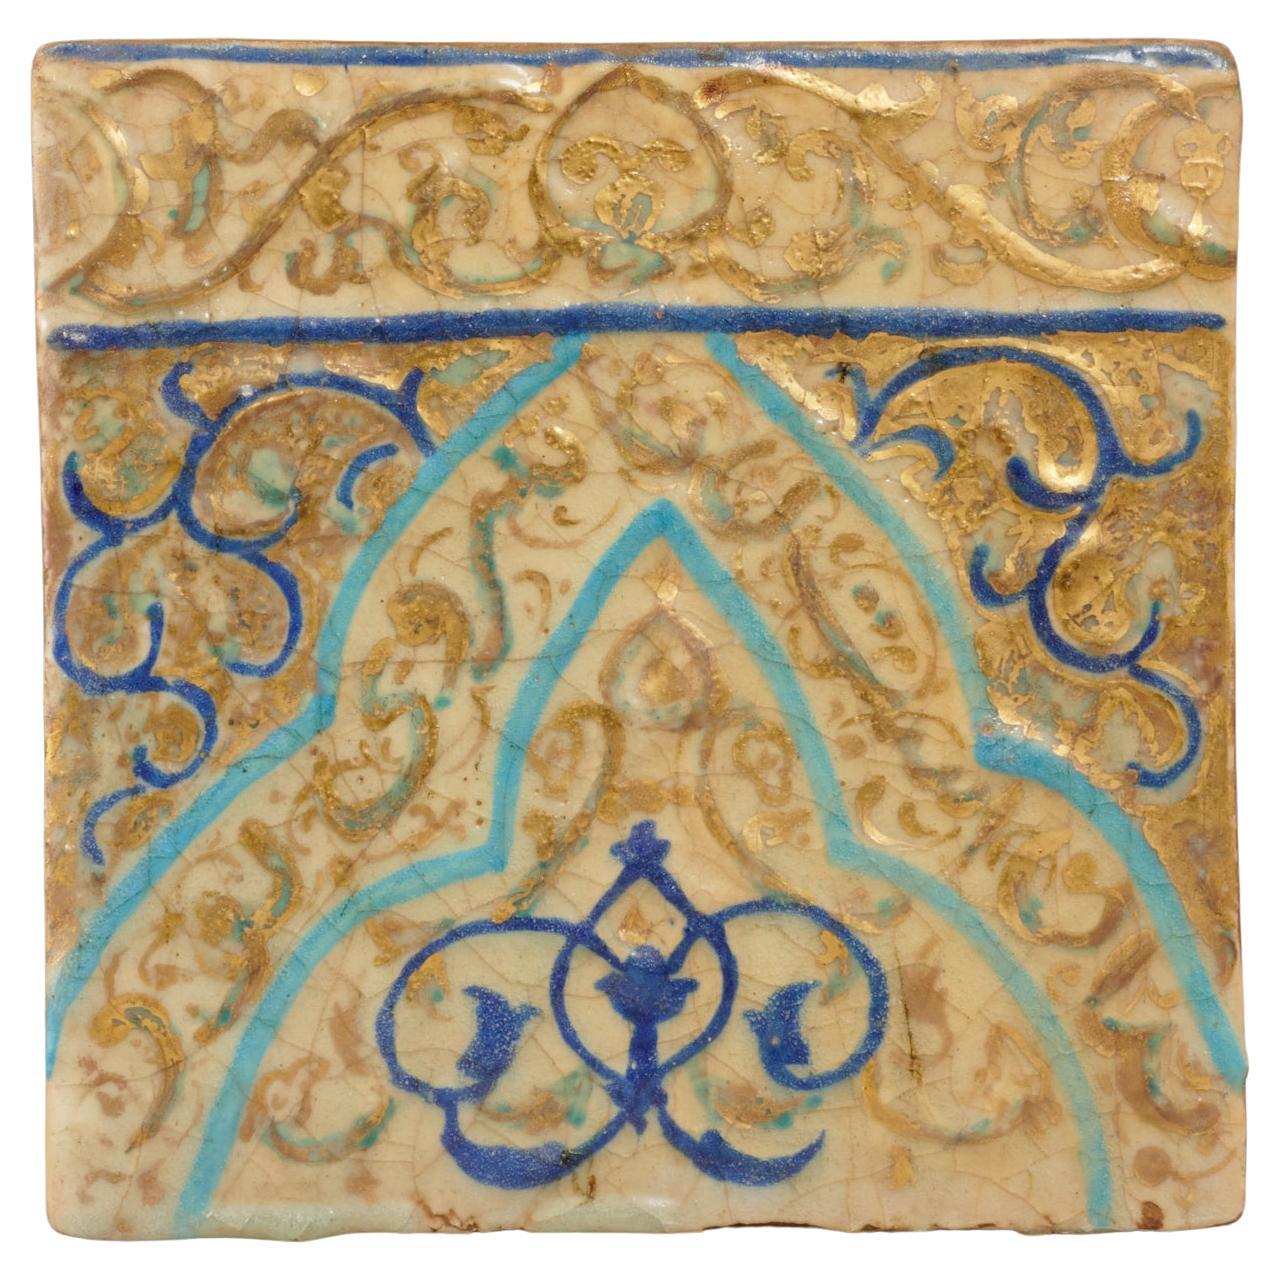 Antique Cobalt Blue, Turquoise and Gold Luster Glazed Persian Palace Tile